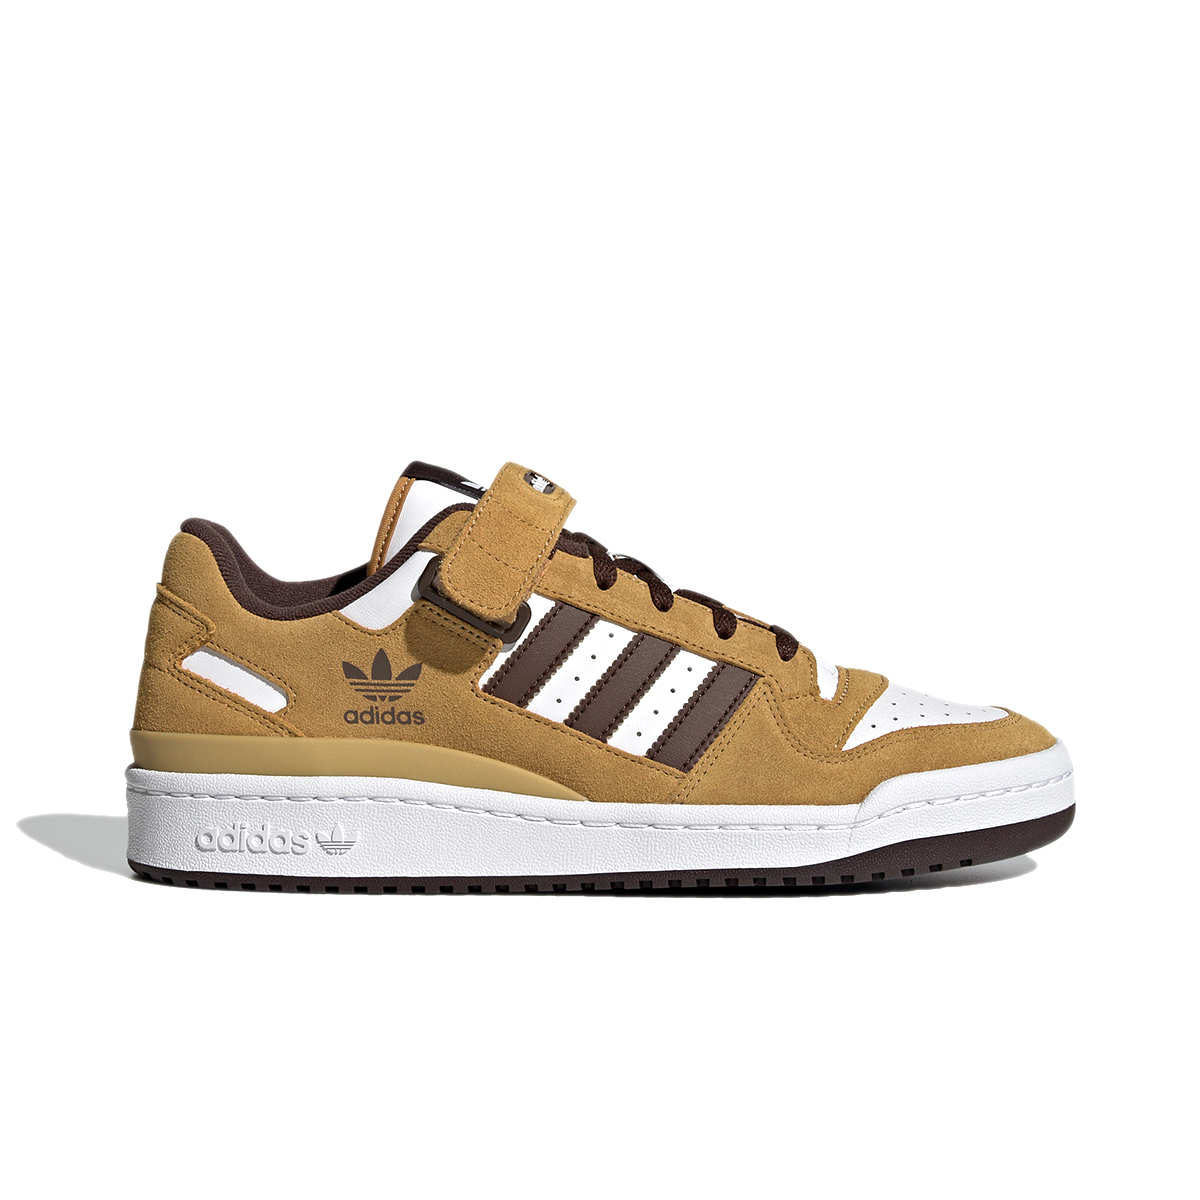 adidas Originals Forum Low - Brown White - Right Side View